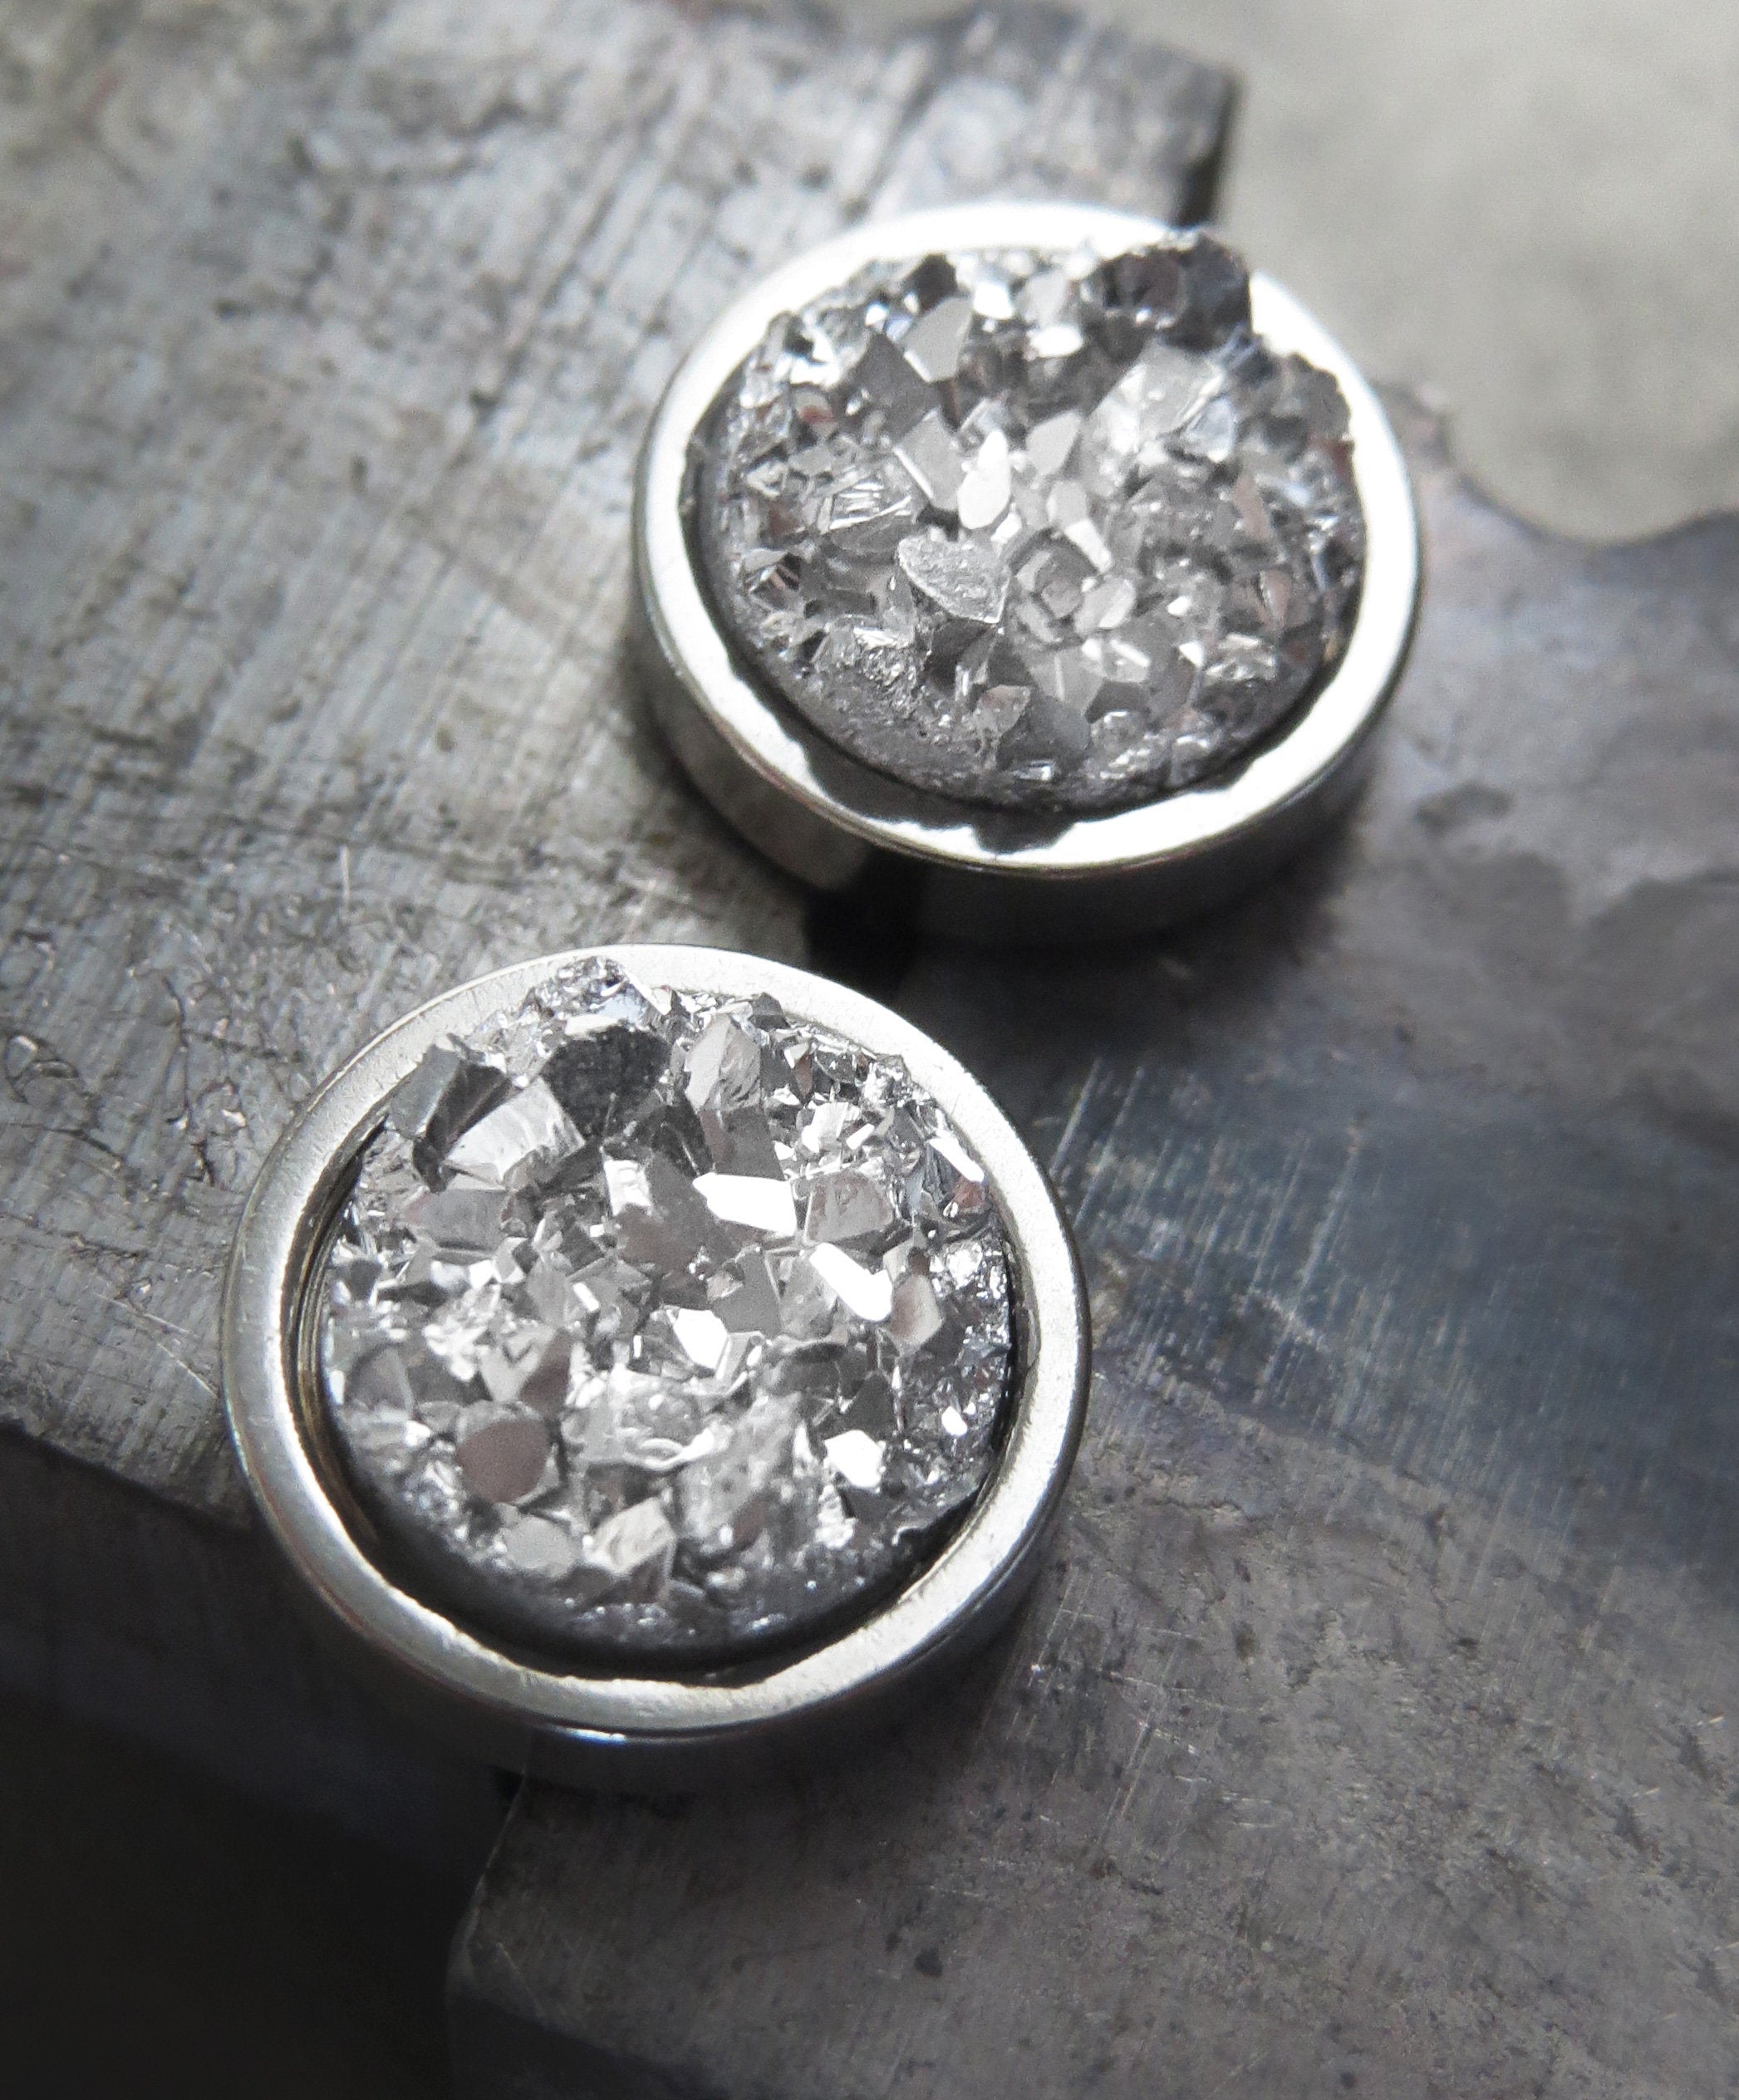 OVER THE MOON - Metallic Silver Stud Earrings with Simulated Druzy Stone in Silver Color Resin - Modern Large Unisex Mens Post Earrings